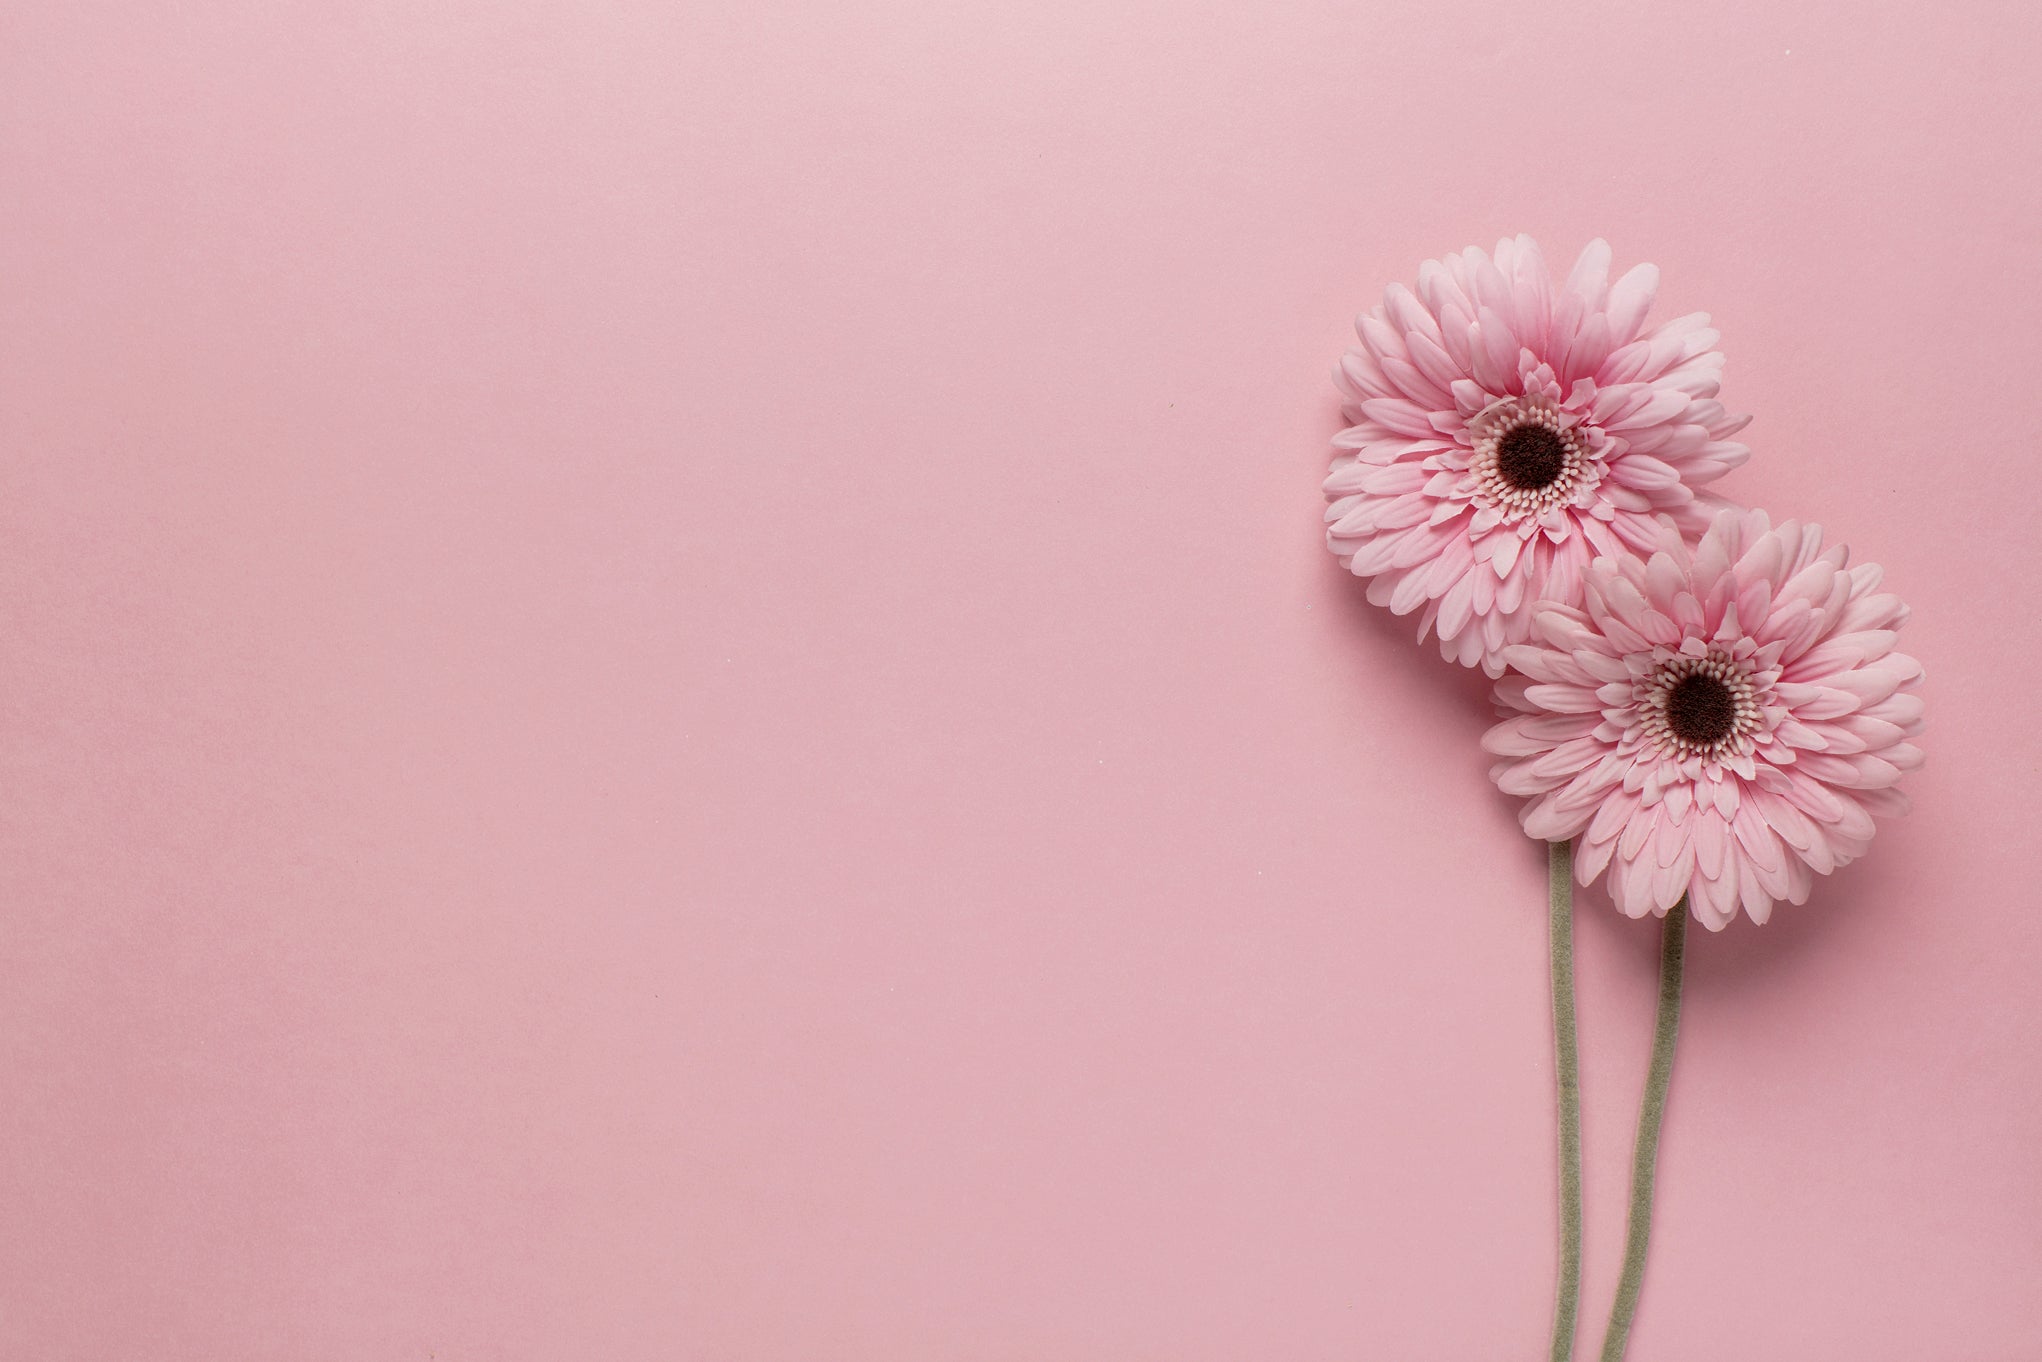 The psychological power of wearing pink